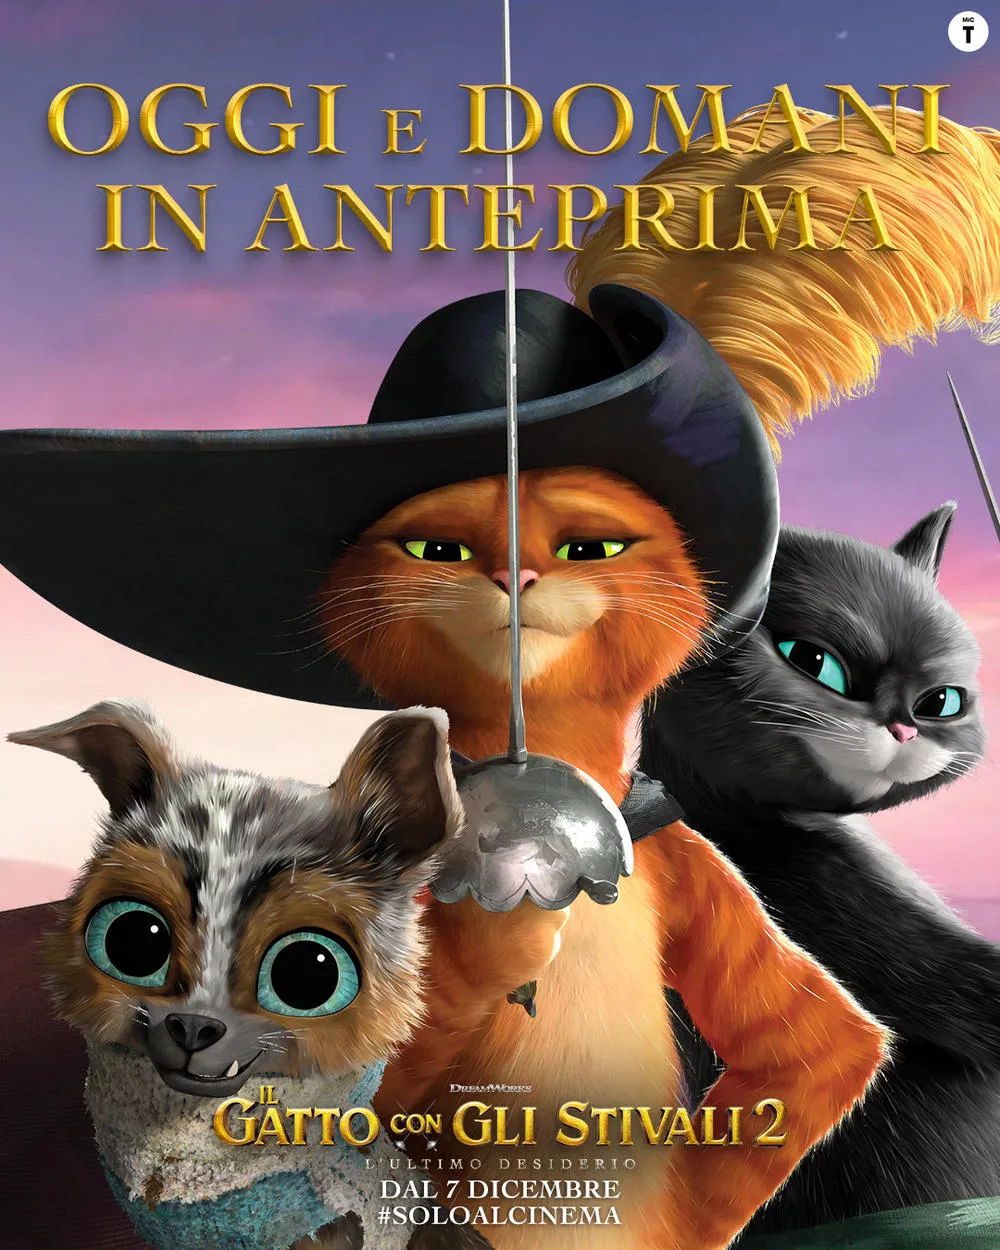 Another masterpiece of DreamWorks animation? 'Puss in Boots: The Last Wish' Rotten Tomatoes is 94% fresh | FMV6